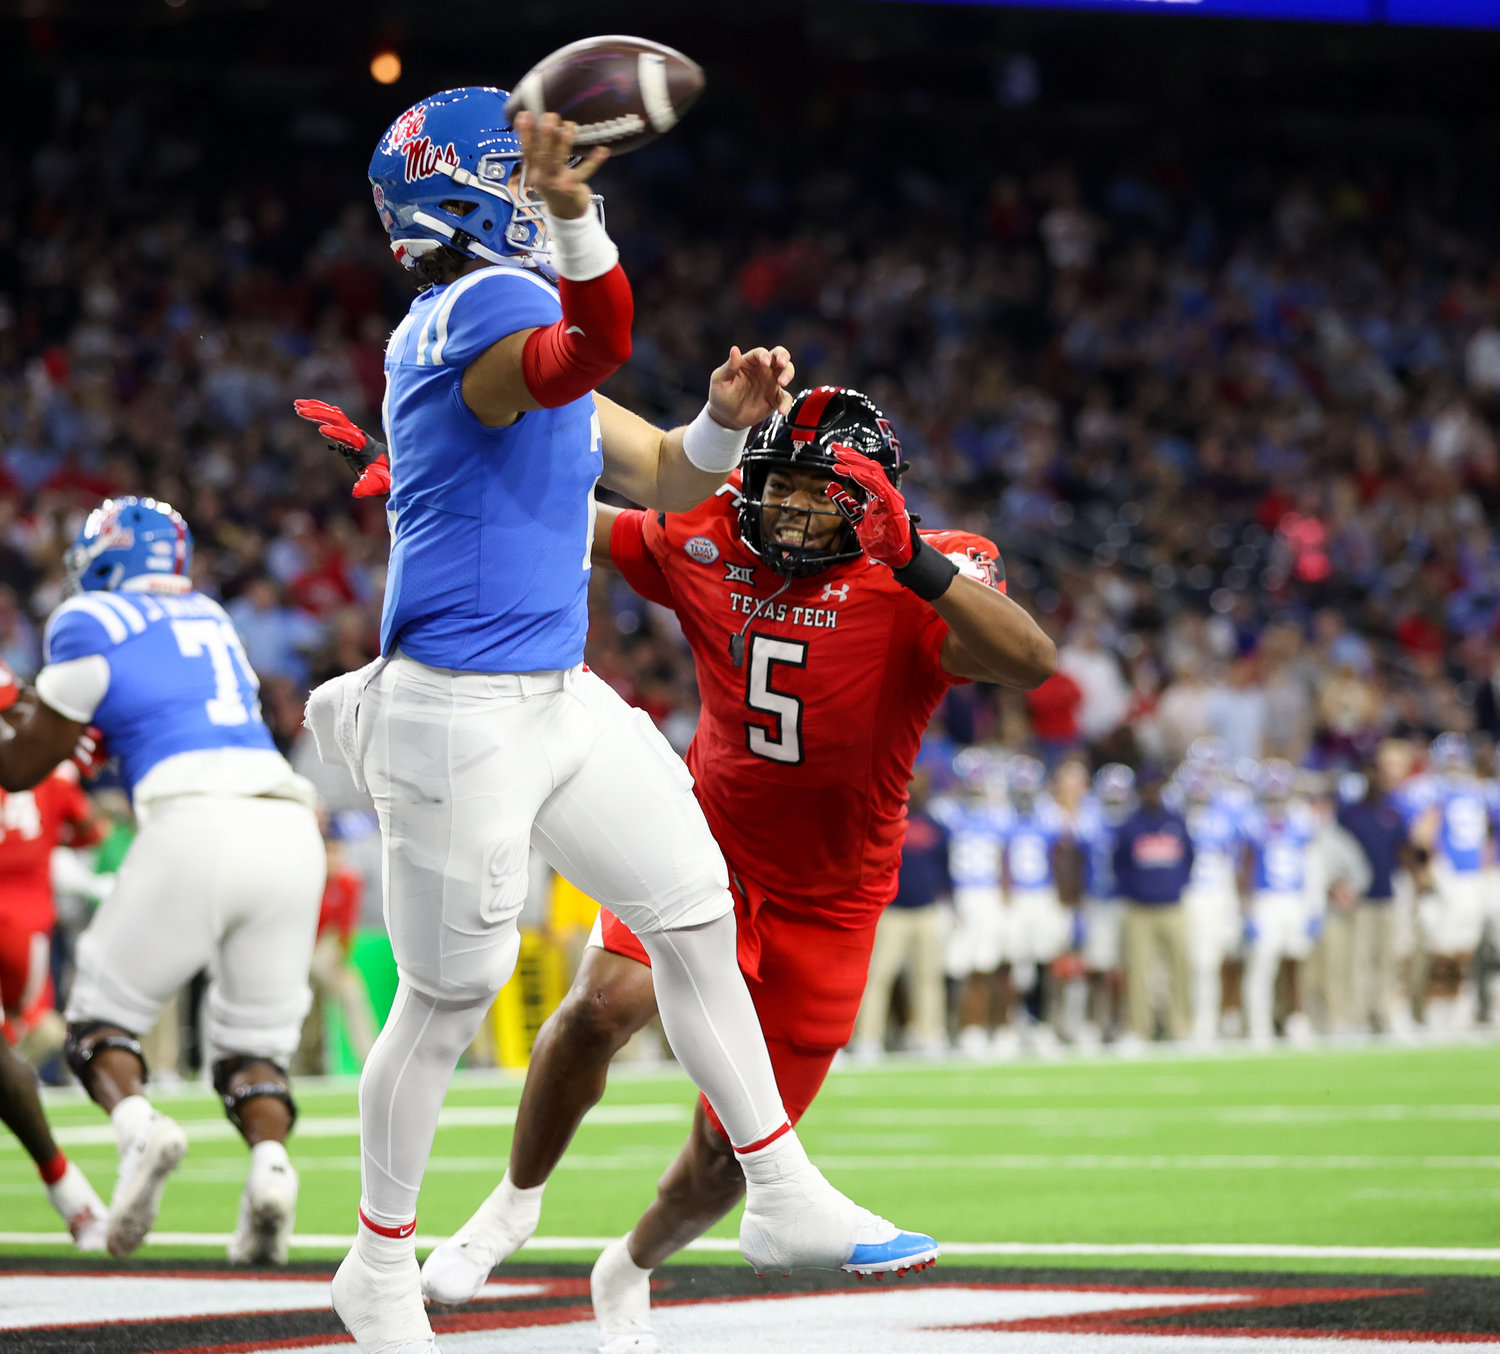 Texas Tech defensive lineman Myles Cole (5) presses Mississippi quarterback Jaxson Dart (2) in the end zone during the TaxAct Texas Bowl on Dec. 28, 2022 in Houston.